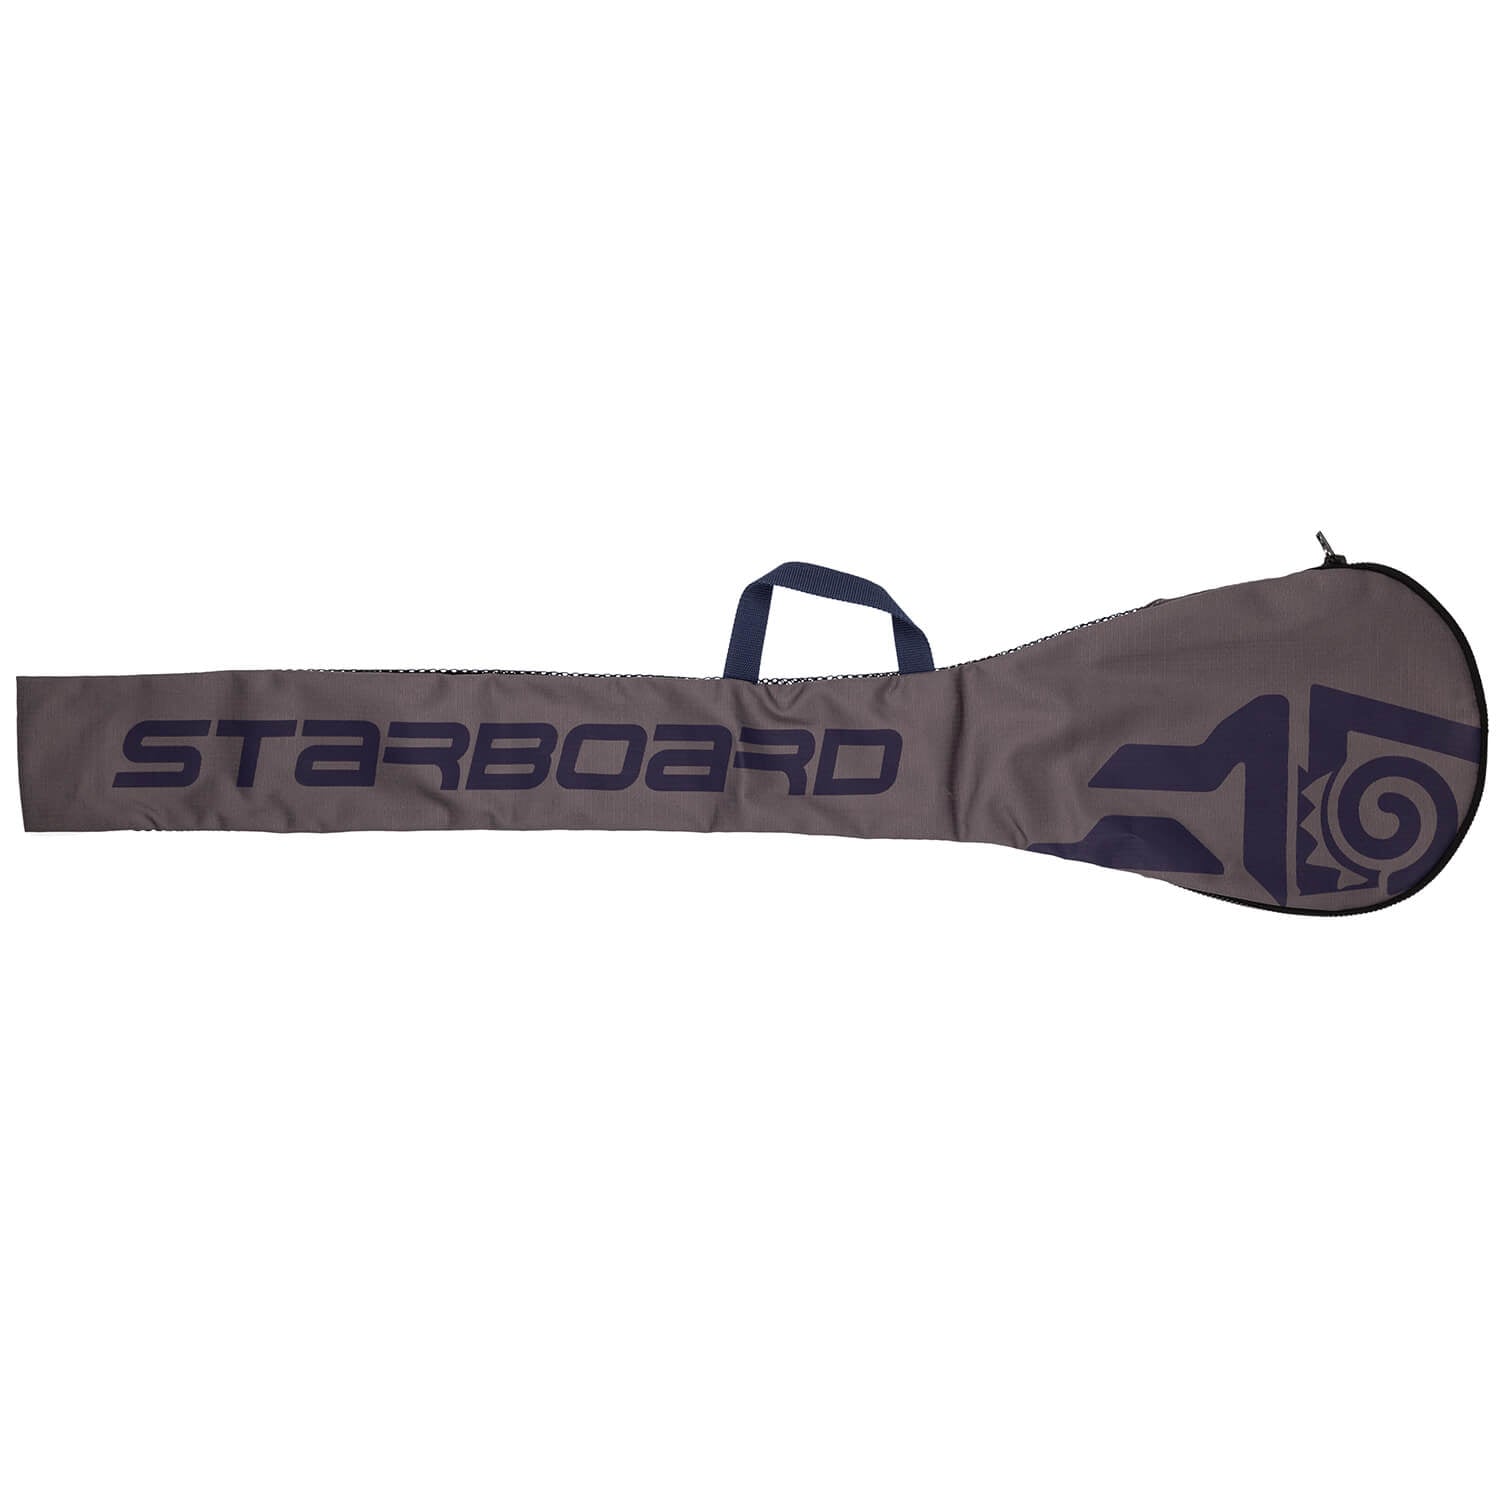 STARBOARD - 3 Piece Paddle Bag